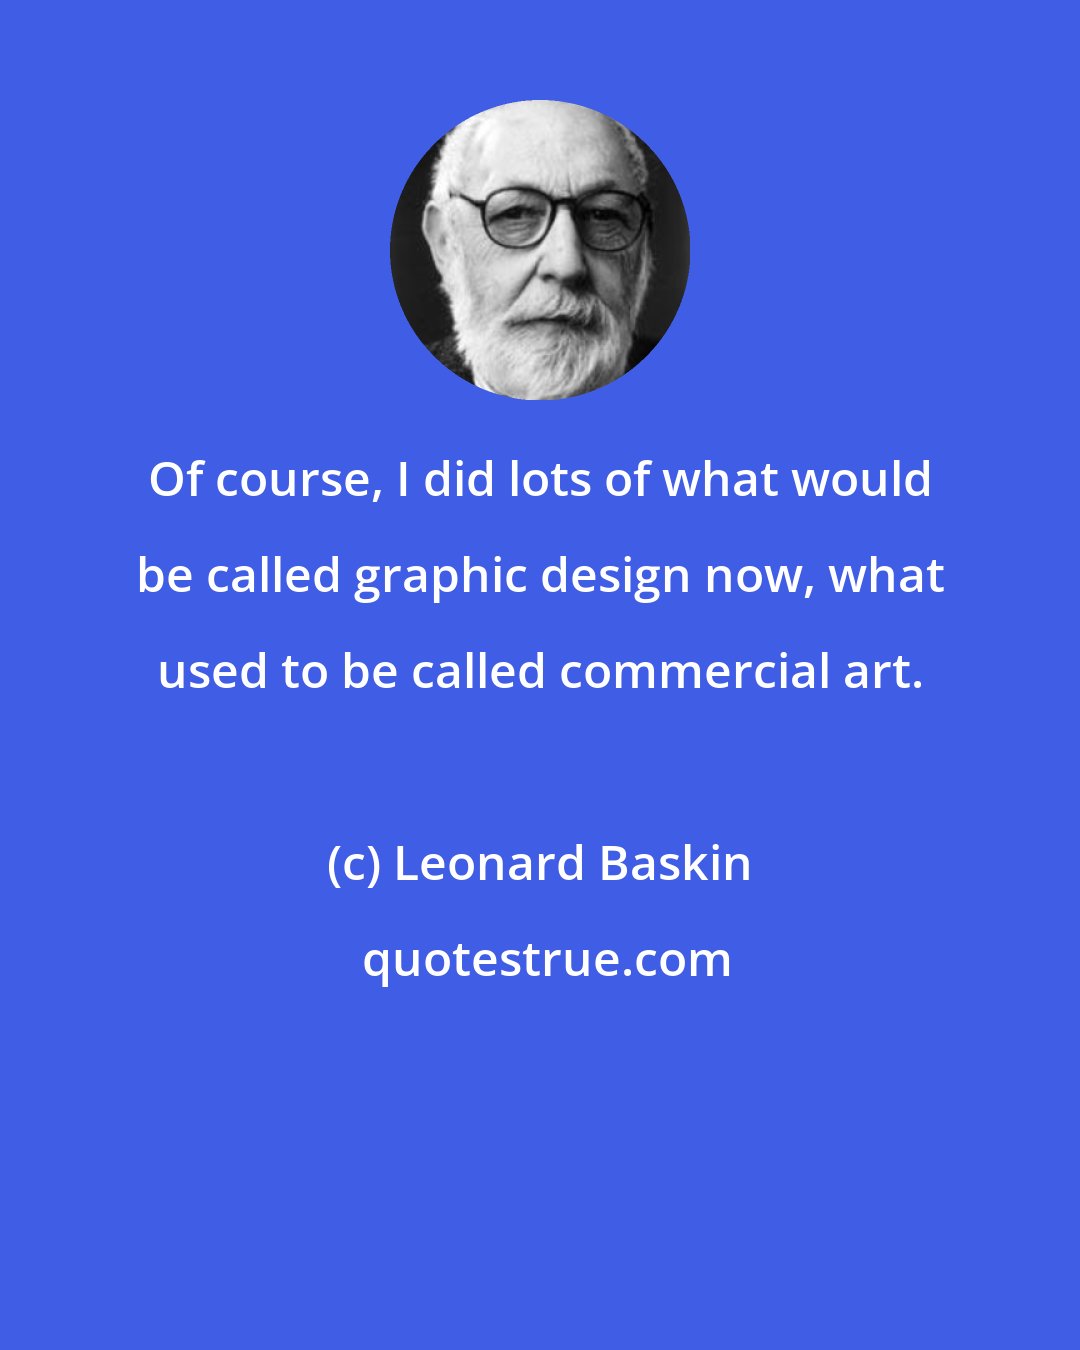 Leonard Baskin: Of course, I did lots of what would be called graphic design now, what used to be called commercial art.